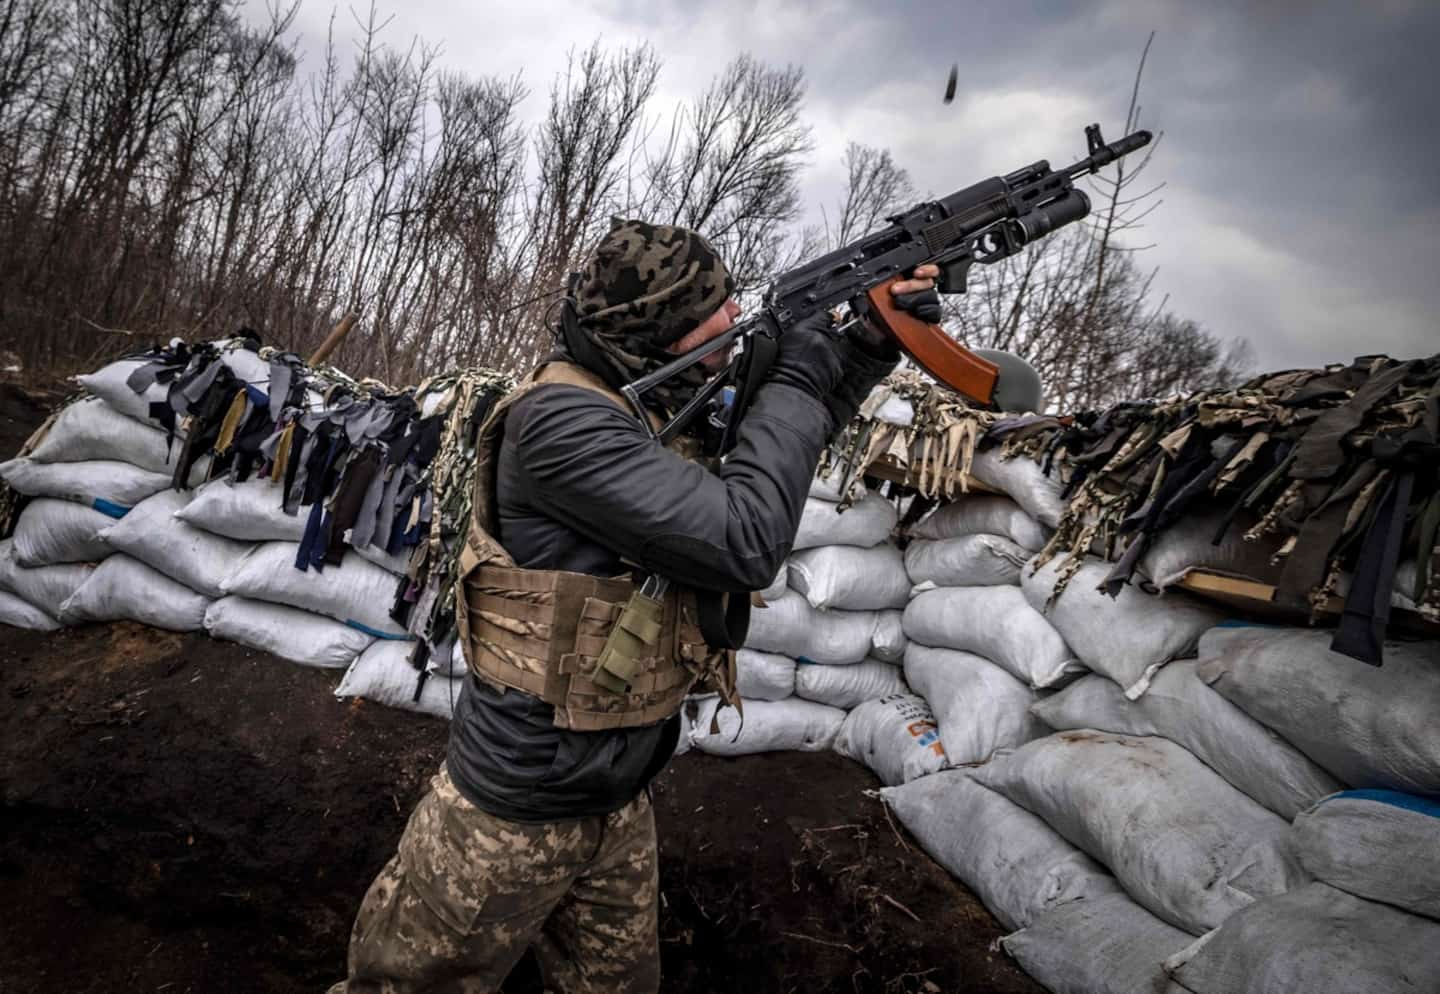 Russian invasion: Ukraine has received "about 10% of the weapons" it demands from Westerners